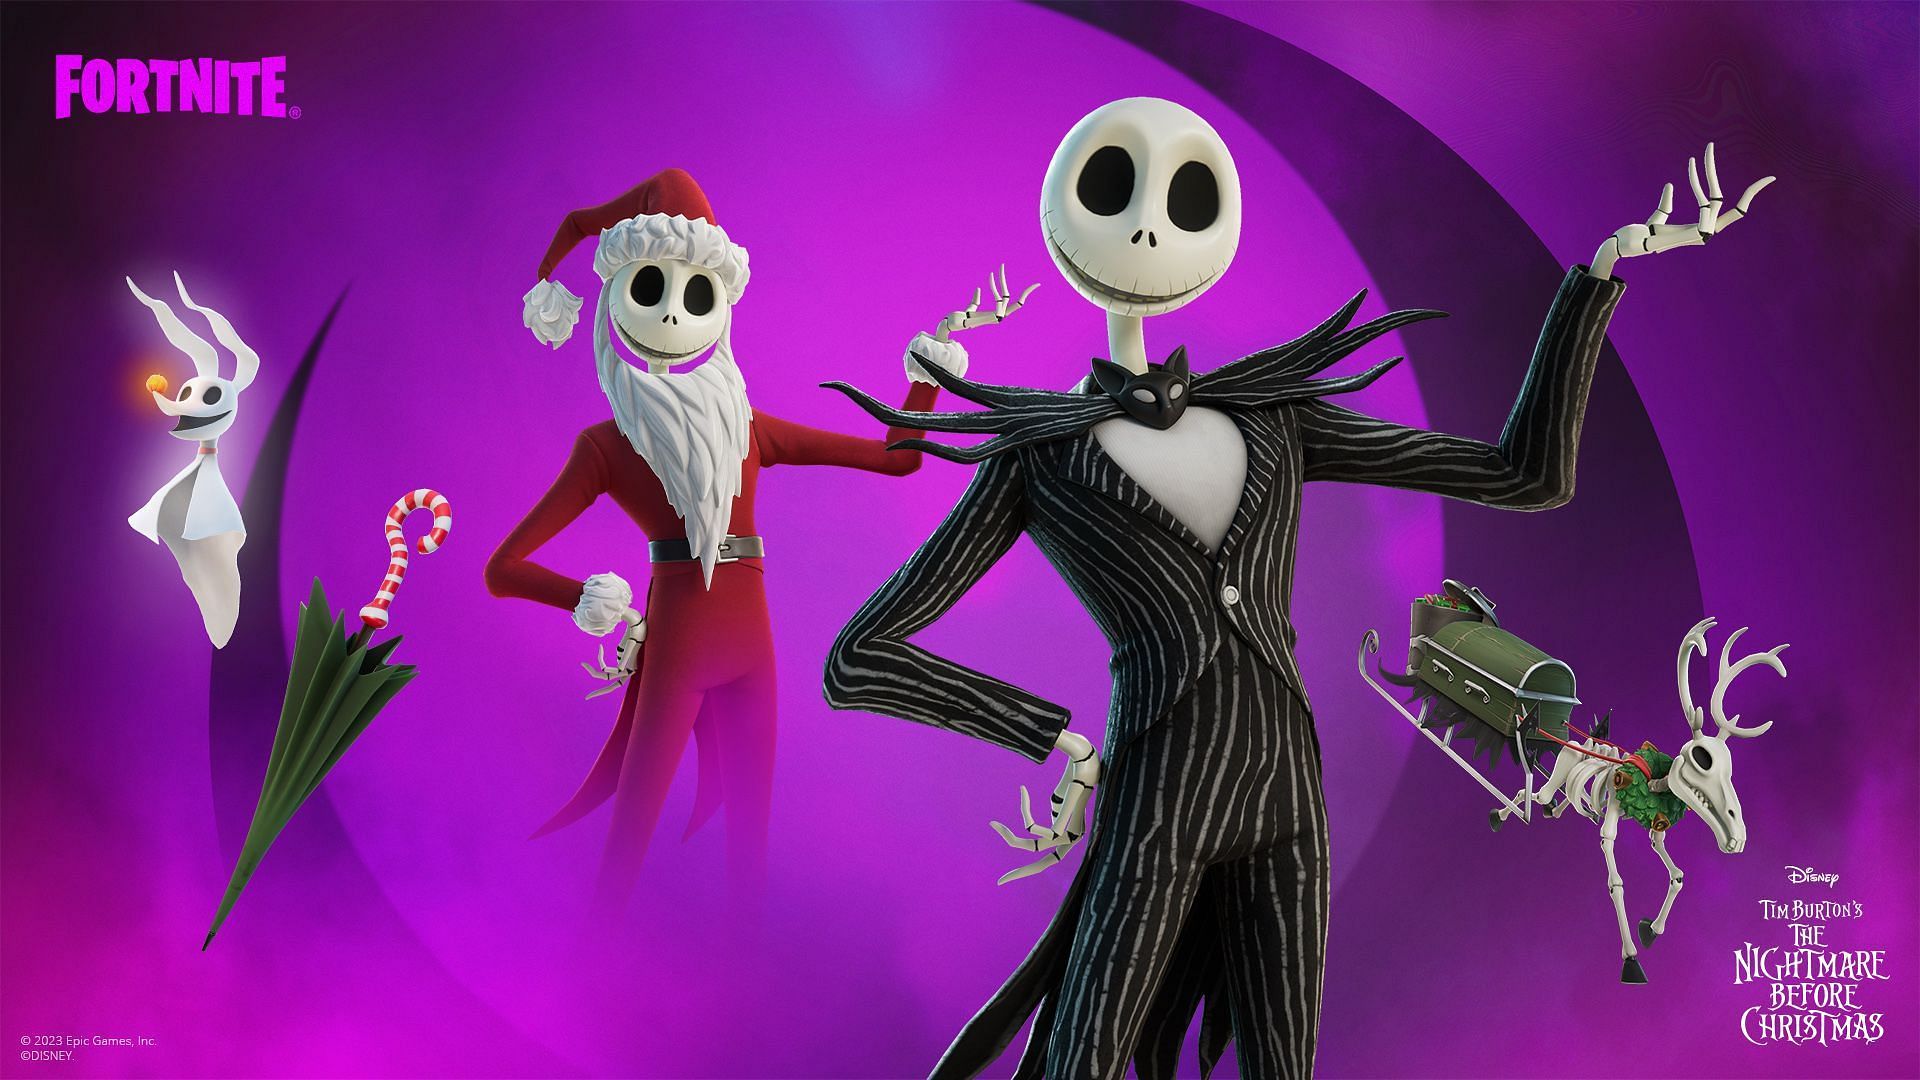 Why was the Jack Skellington skin disabled in Fortnite? Explained